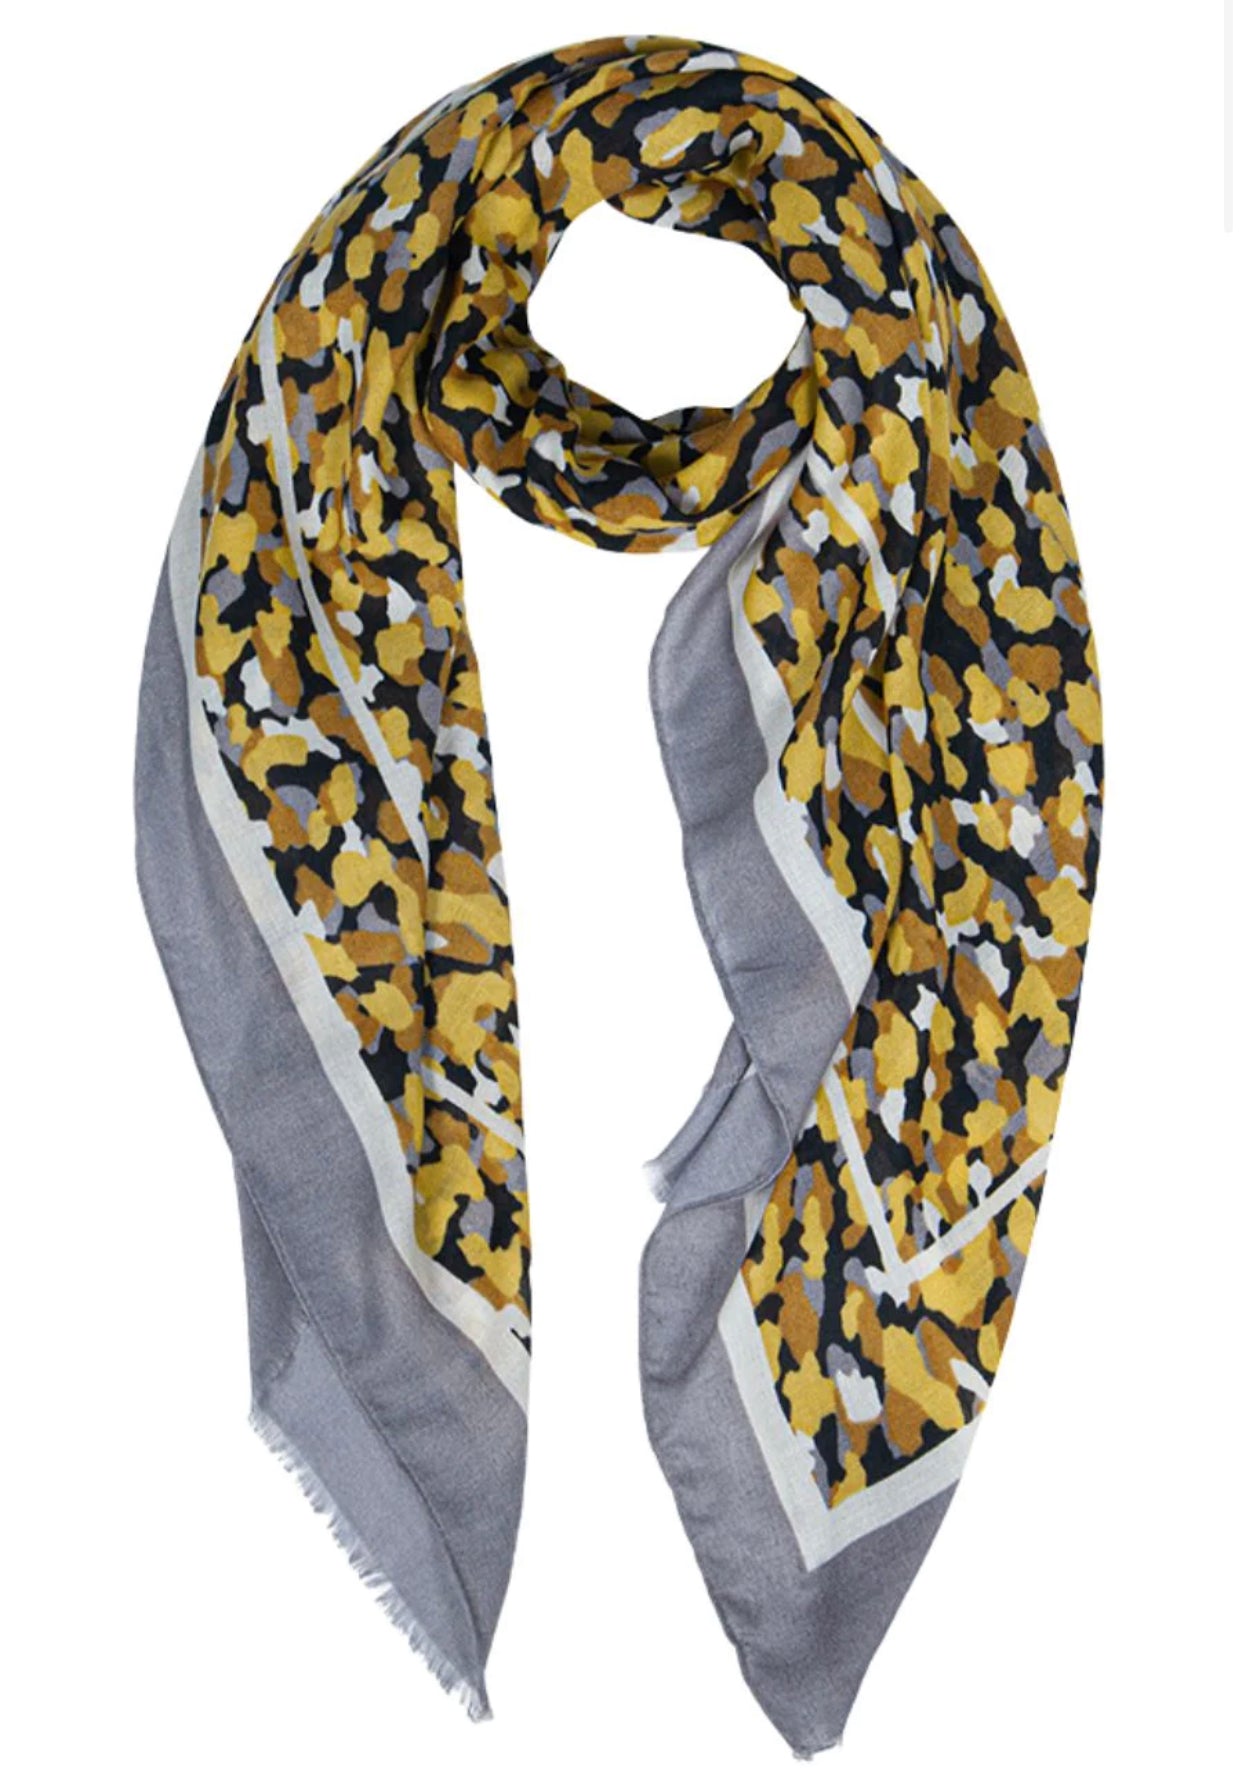 Patterned Scarf - Mustard Camo